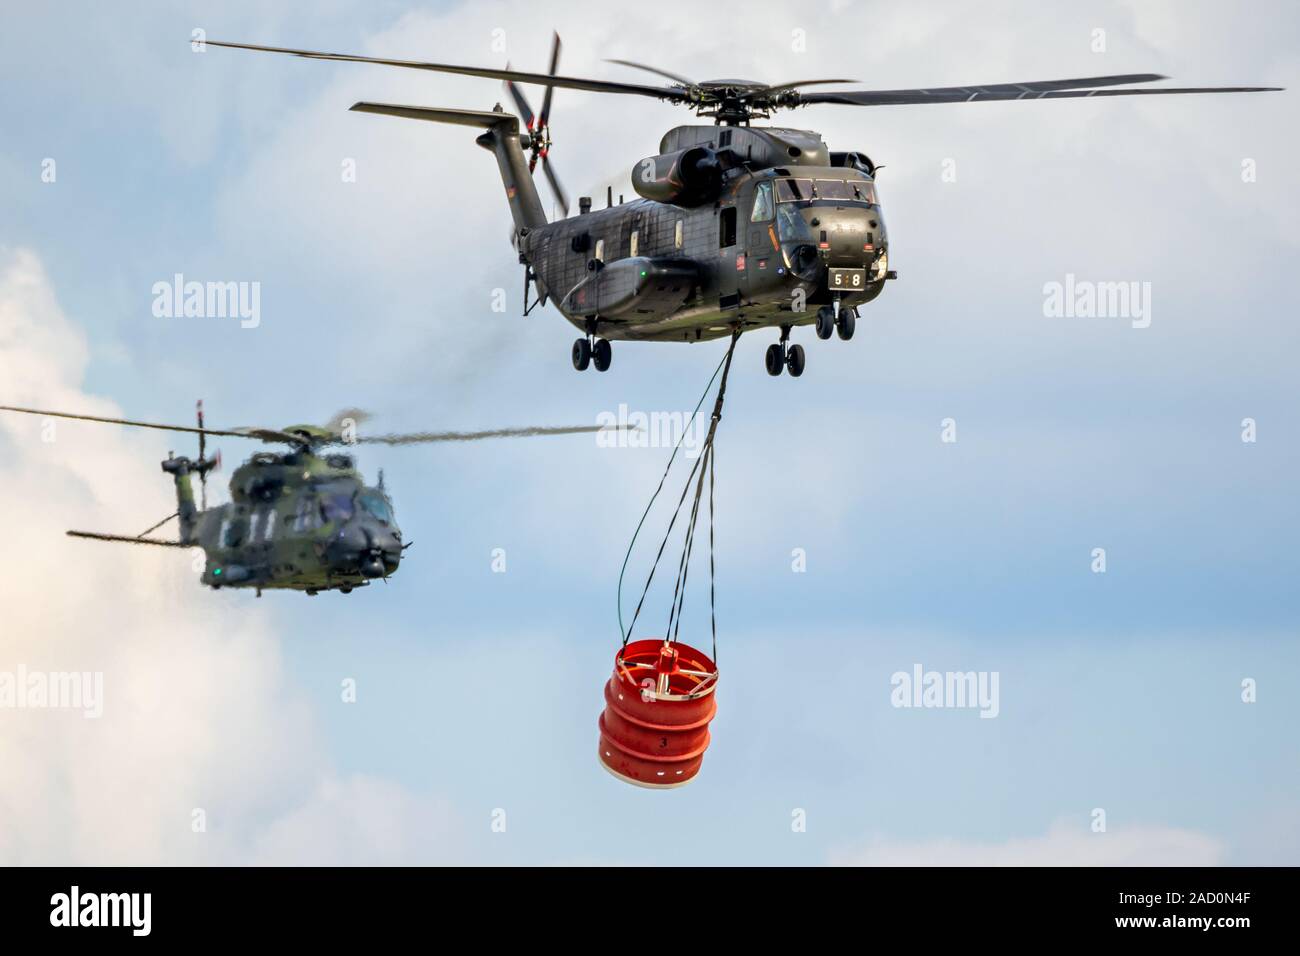 BERLIN - APR 27, 2018: German Air Force NH90 and CH-53 Stallion helicopter with a bambi-bucket during an aerial fire fighting demonstration at the Ber Stock Photo